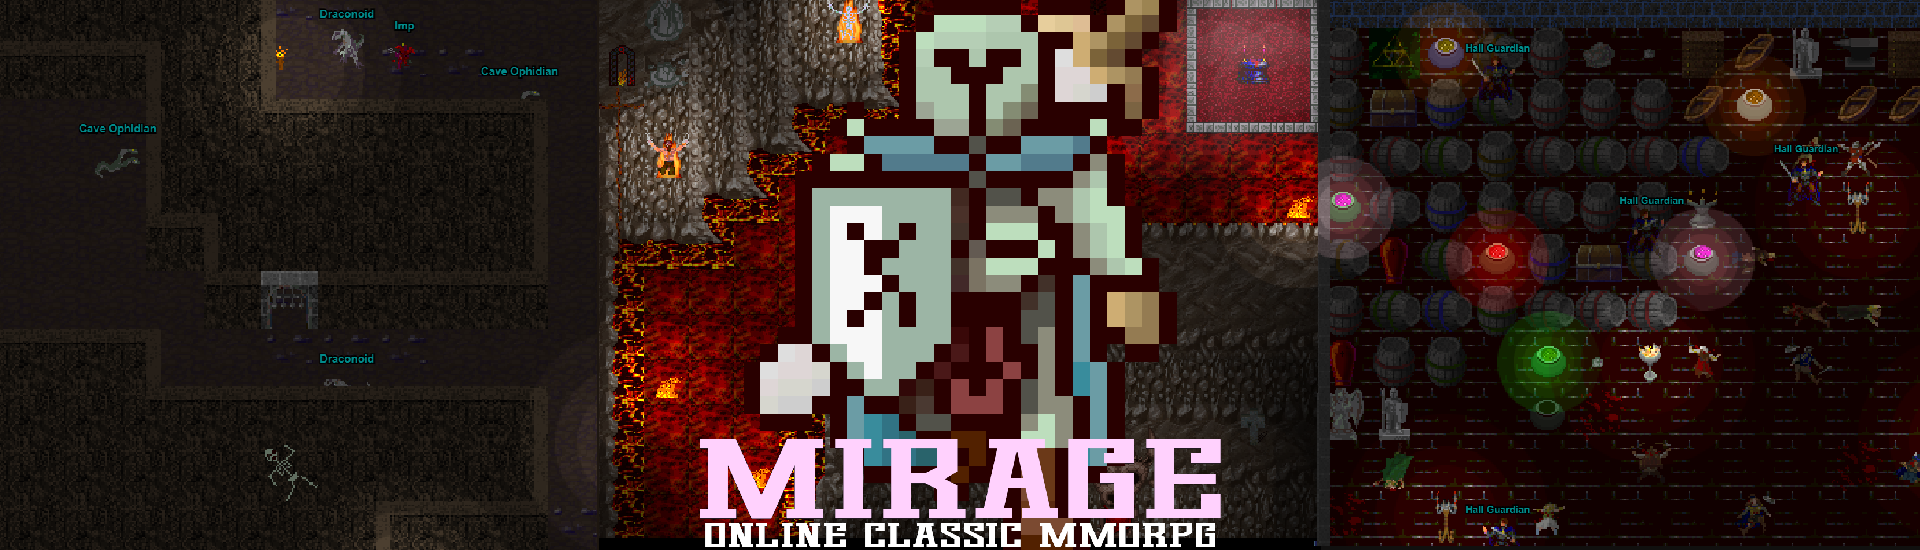 Mirage Online Classic - Free 2D HTML5 Browser MMORPG - Release Announcements